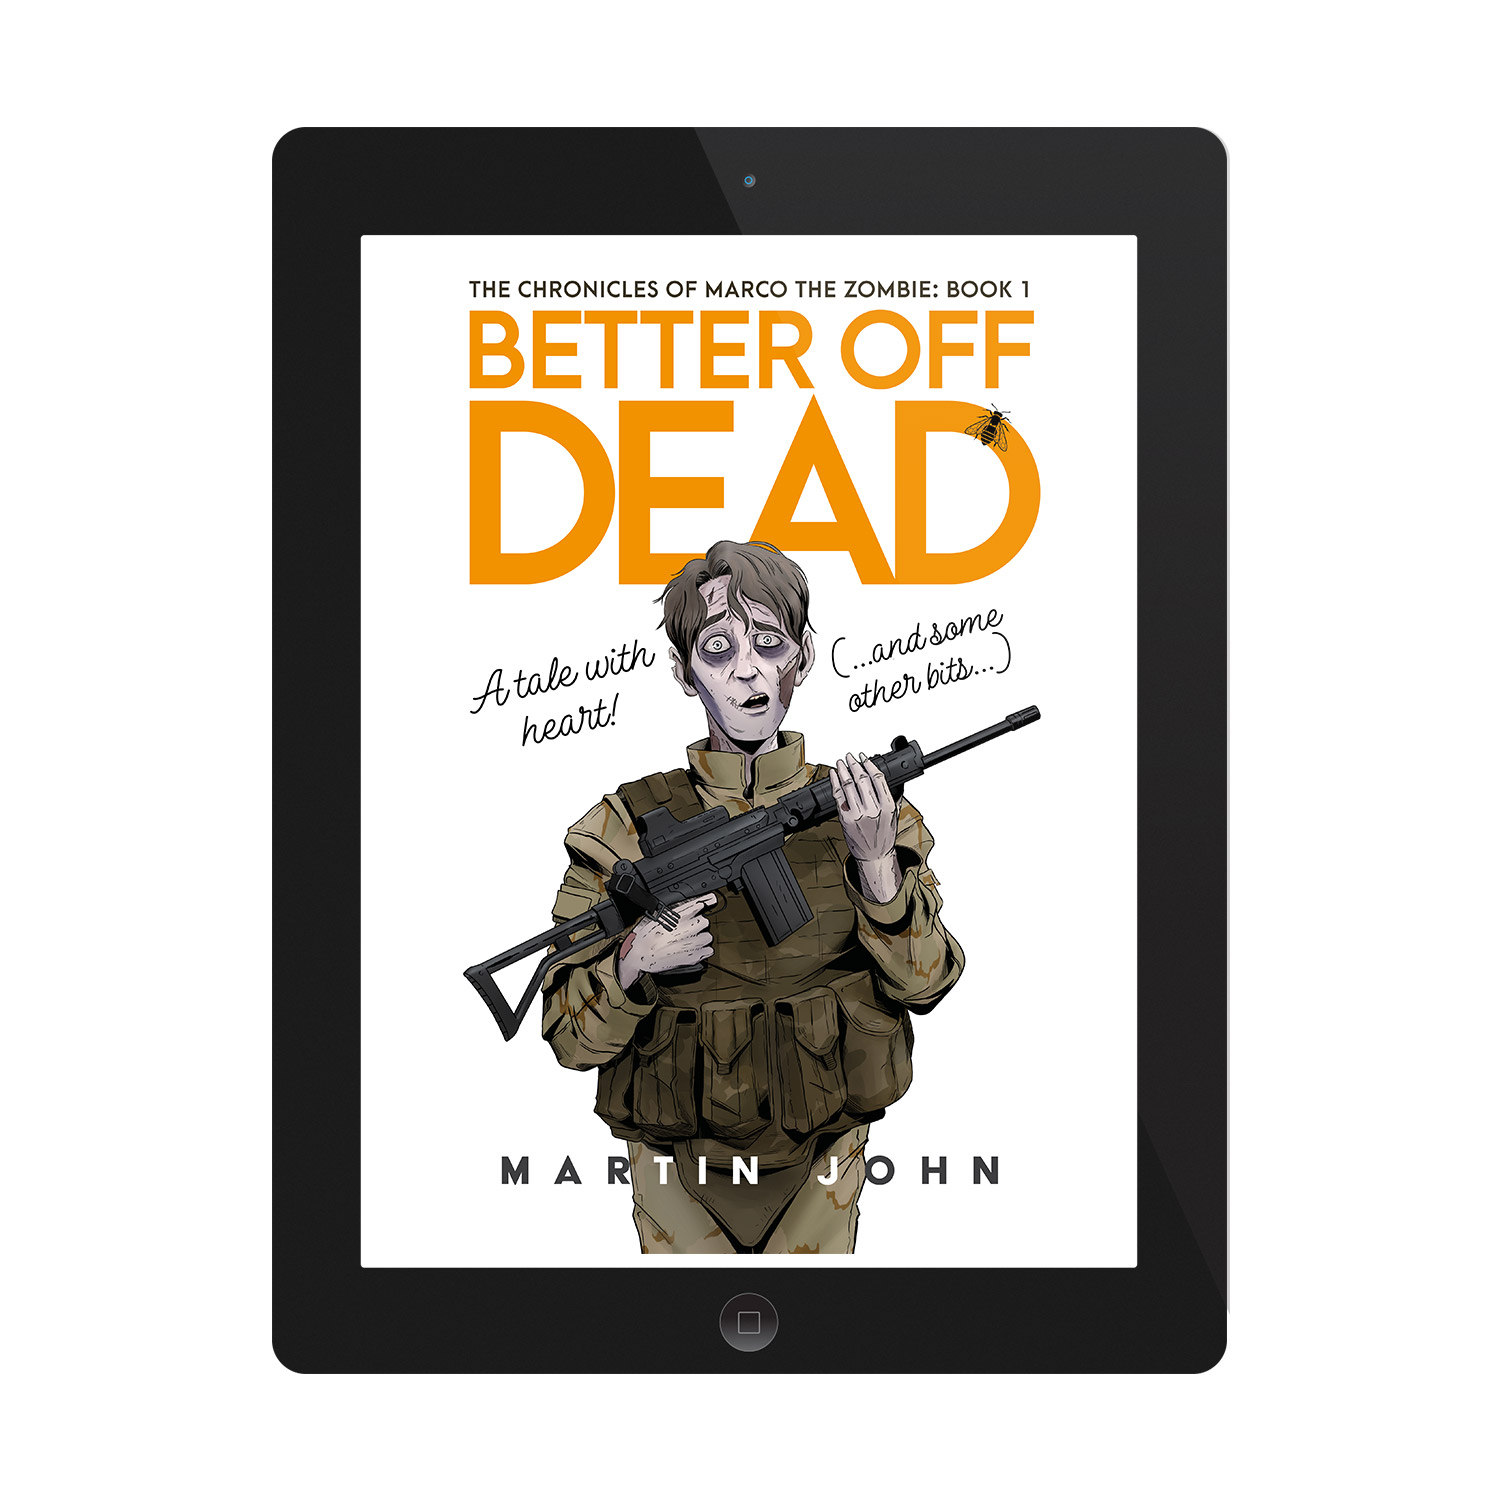 'Better Of Dead' is a bone-dry zombie comedy novel. The book cover design and interior formatting are by Mark Thomas. To learn more about what Mark could do for your book, please visit coverness.com.